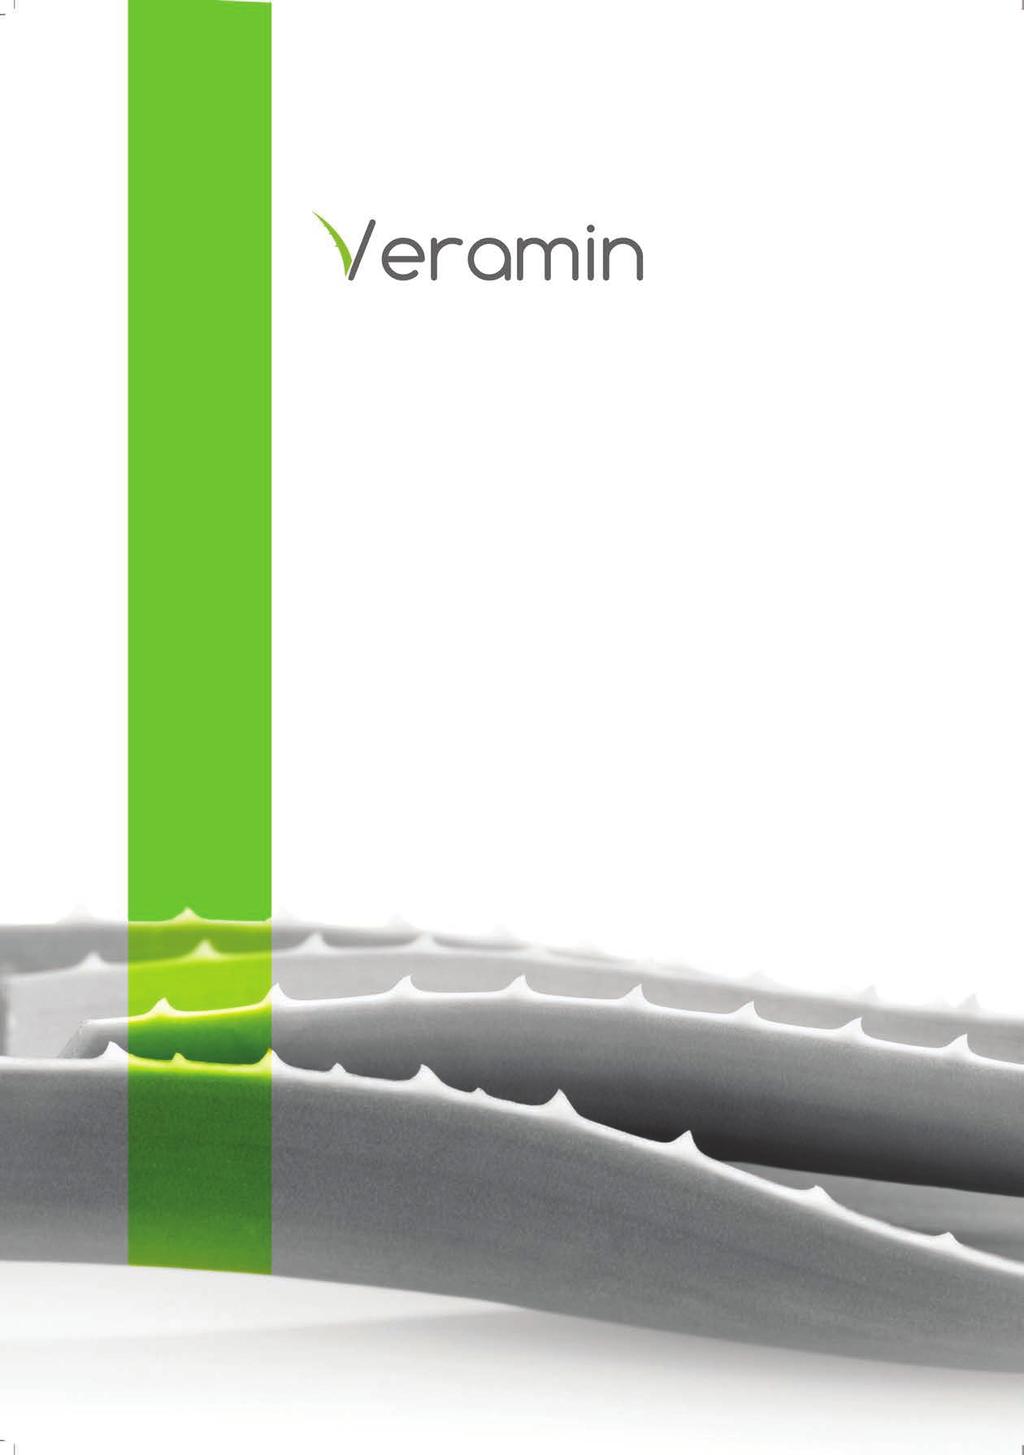 VERAMIN Line liquid foliar fertilizers are the first product line for plant nutrition and biostimulation based on ALOE VERA (Aloe Barbadensis) extracts and vegetable amino acids.